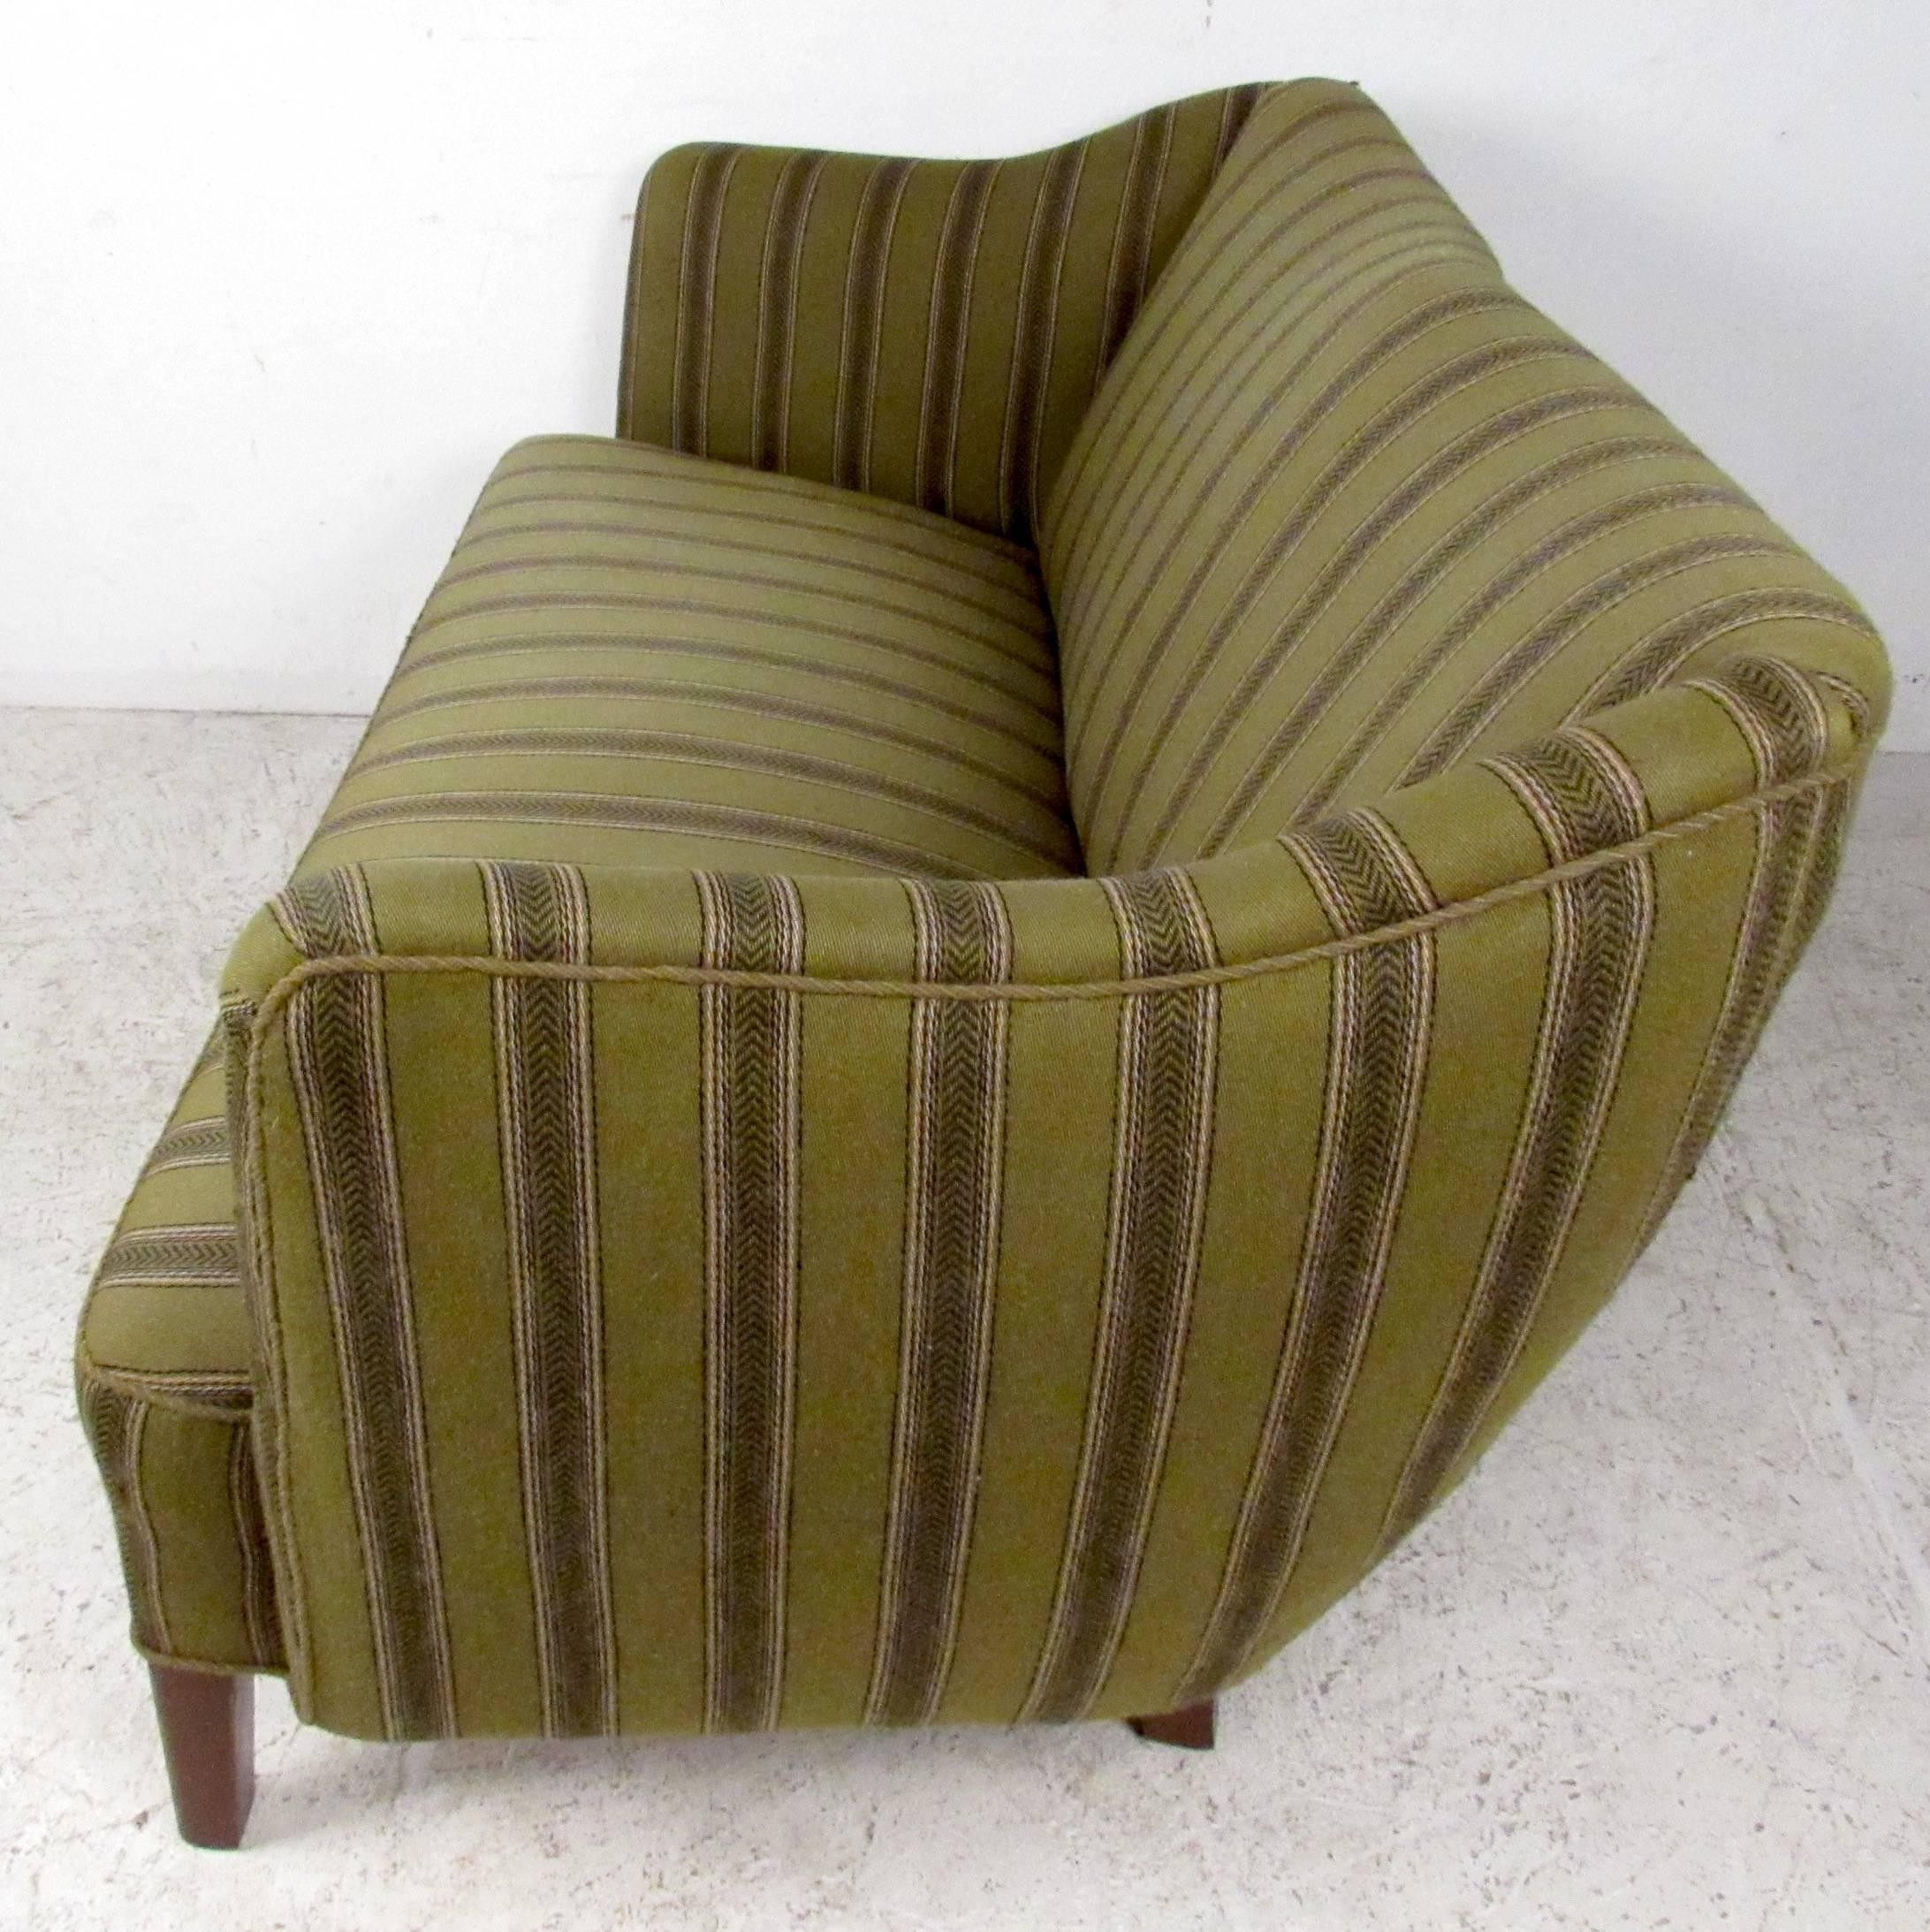 Scandinavian modern sofa features sculpted frame with vintage striped upholstery and hardwood legs. Comfortable loveseat makes an impressive mid-century addition to any interior. Please confirm item location (NY or NJ). 